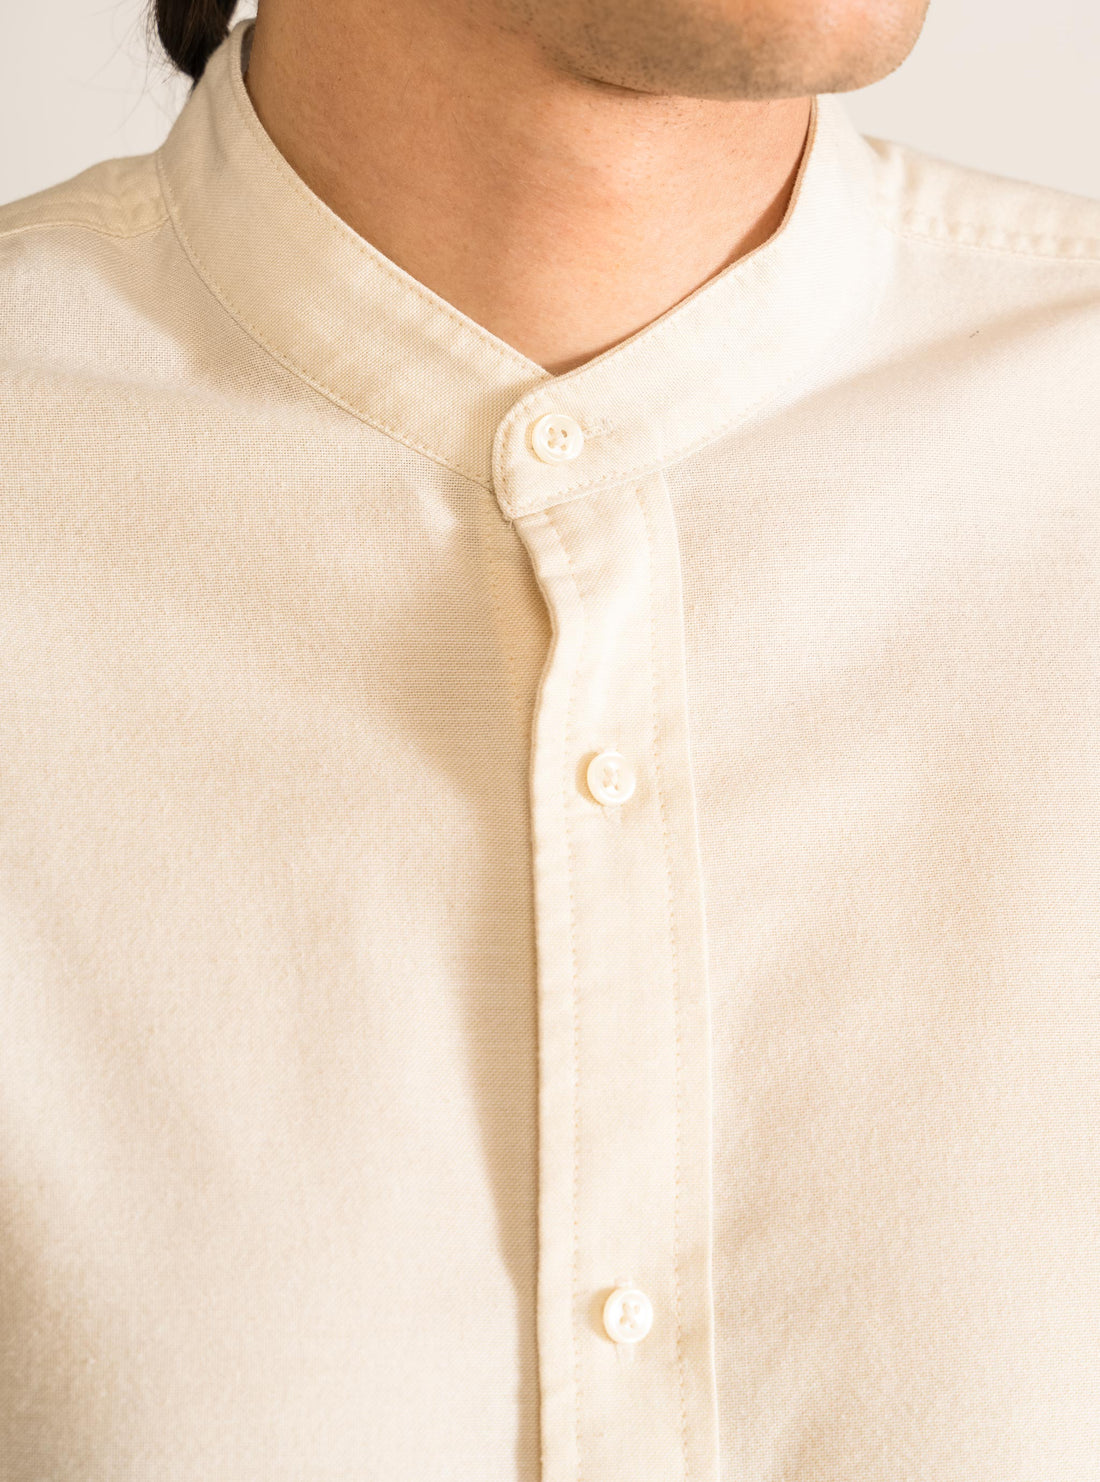 End of the Night Shirt, Beige